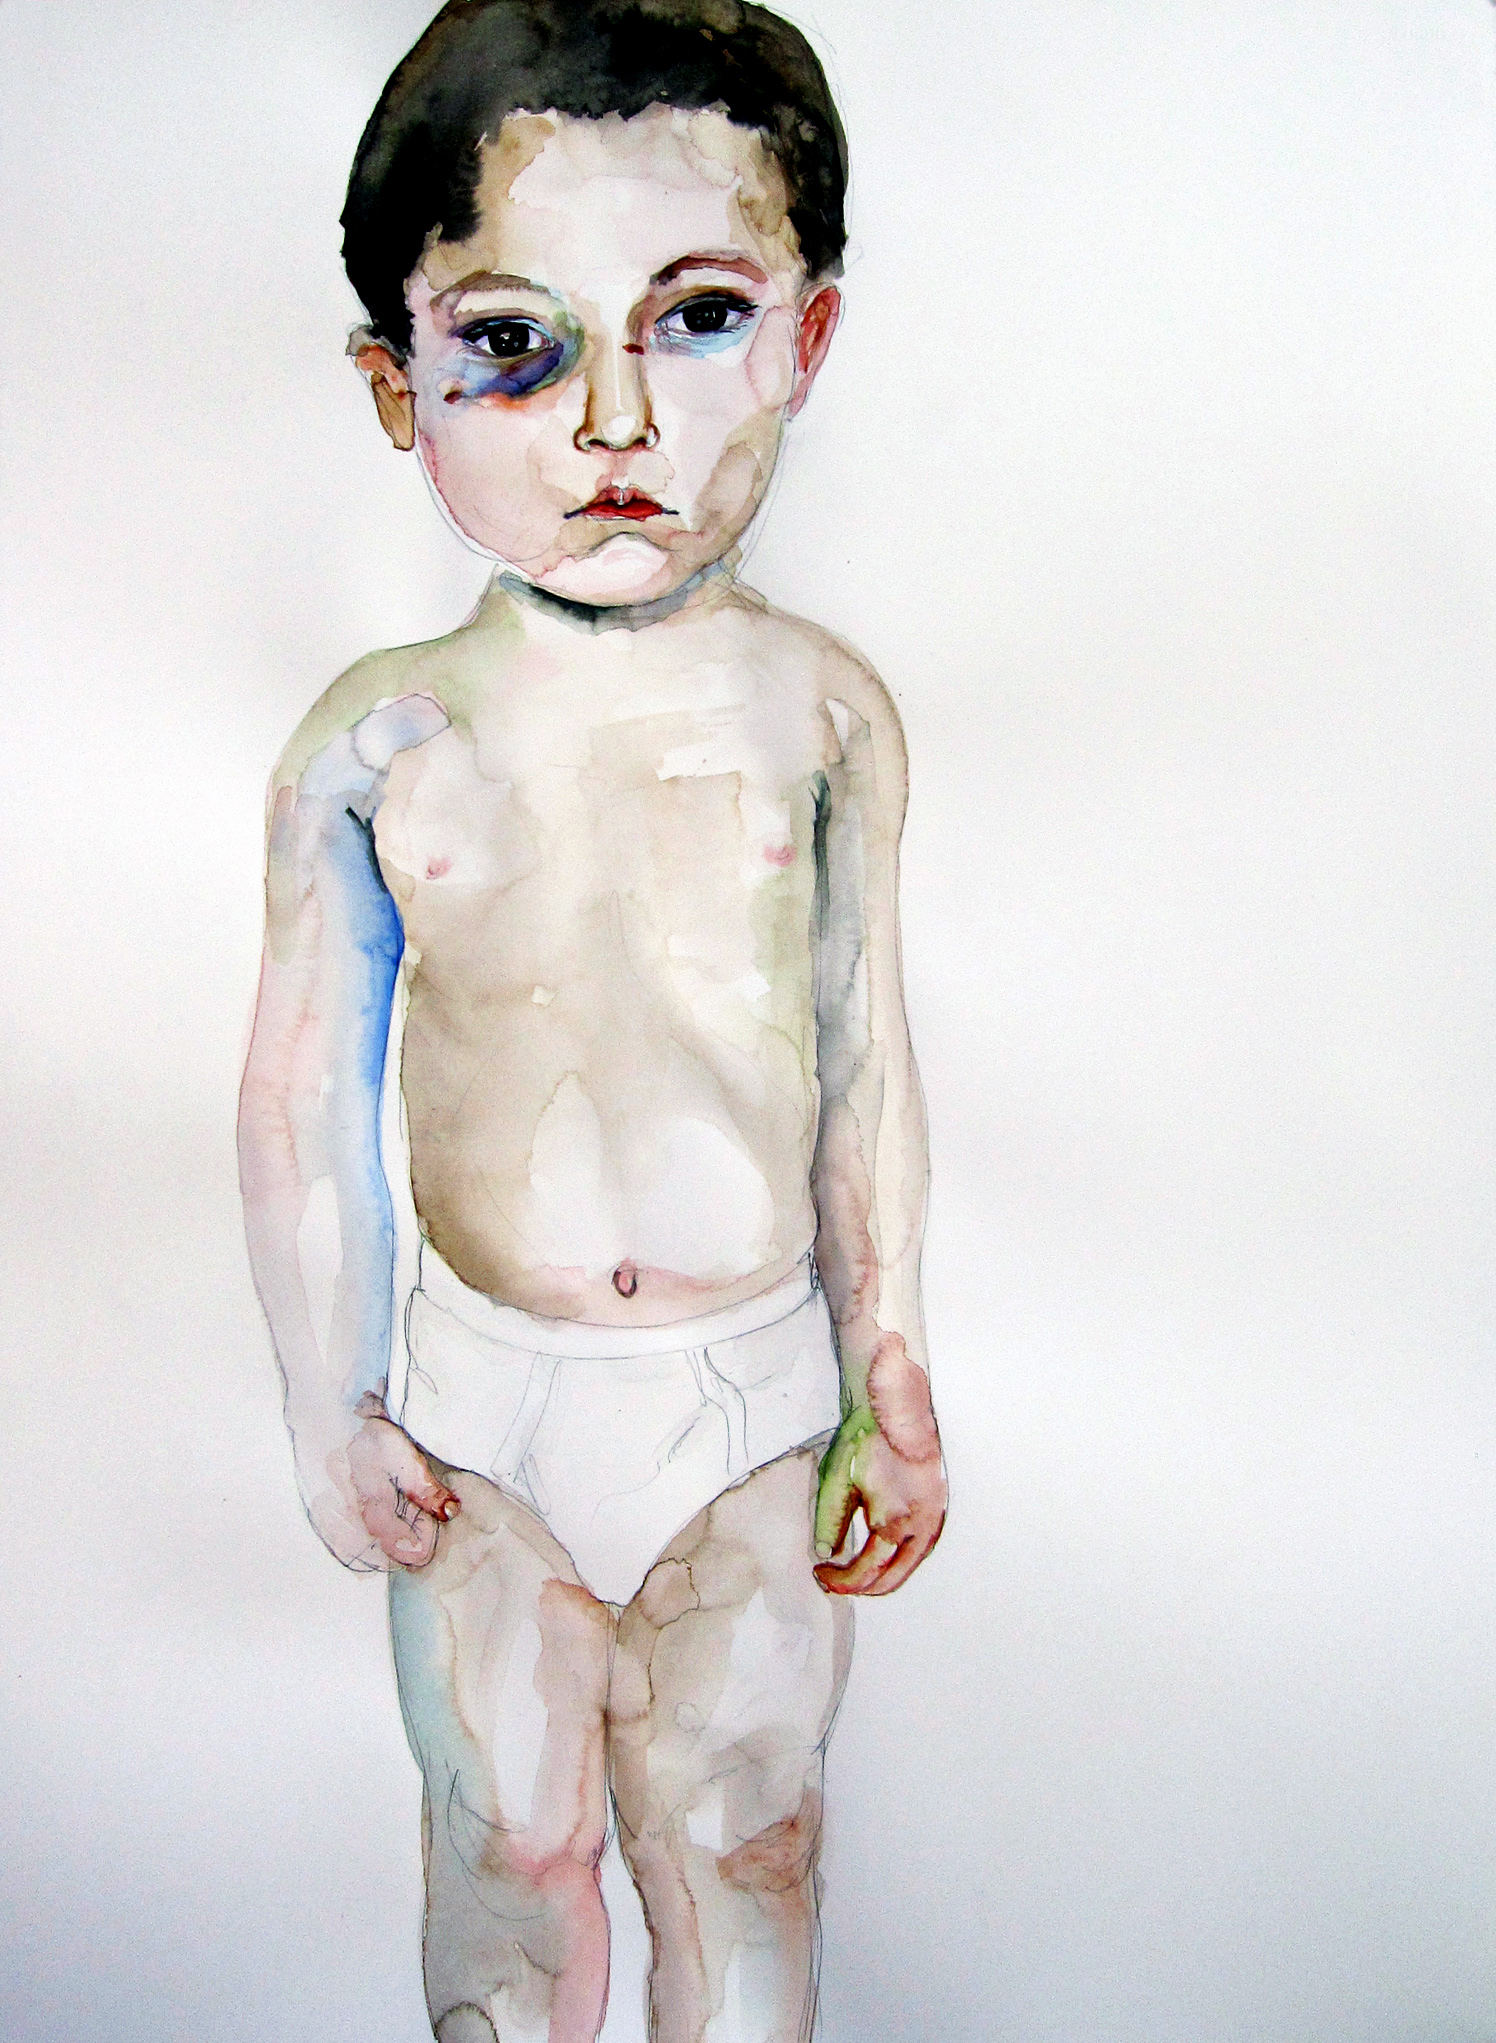 Bruise, 2010, Graphite and watercolor on paper, 30 x 22 in.